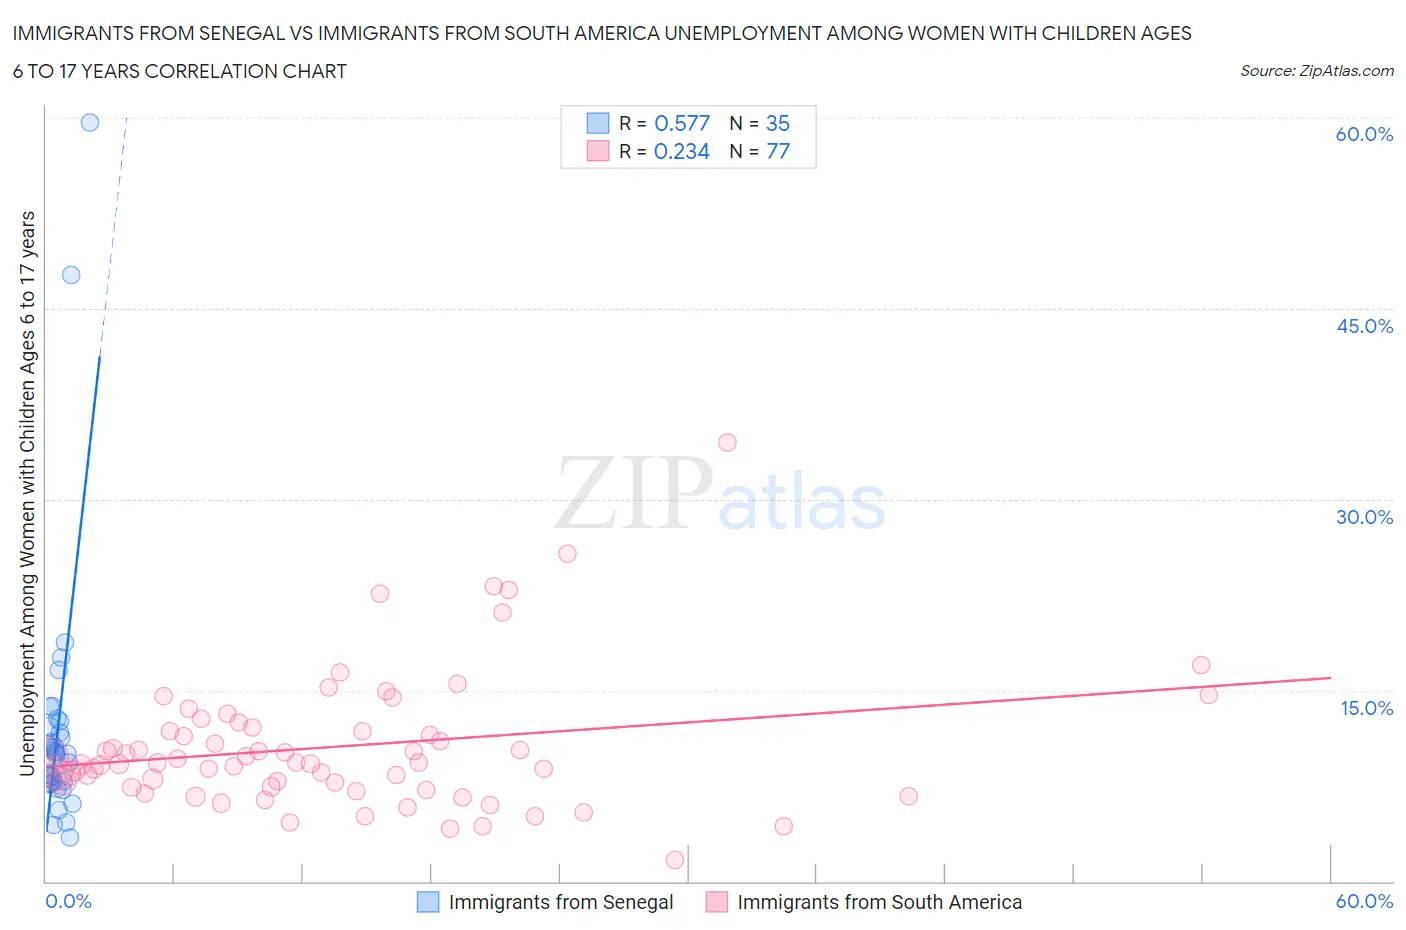 Immigrants from Senegal vs Immigrants from South America Unemployment Among Women with Children Ages 6 to 17 years